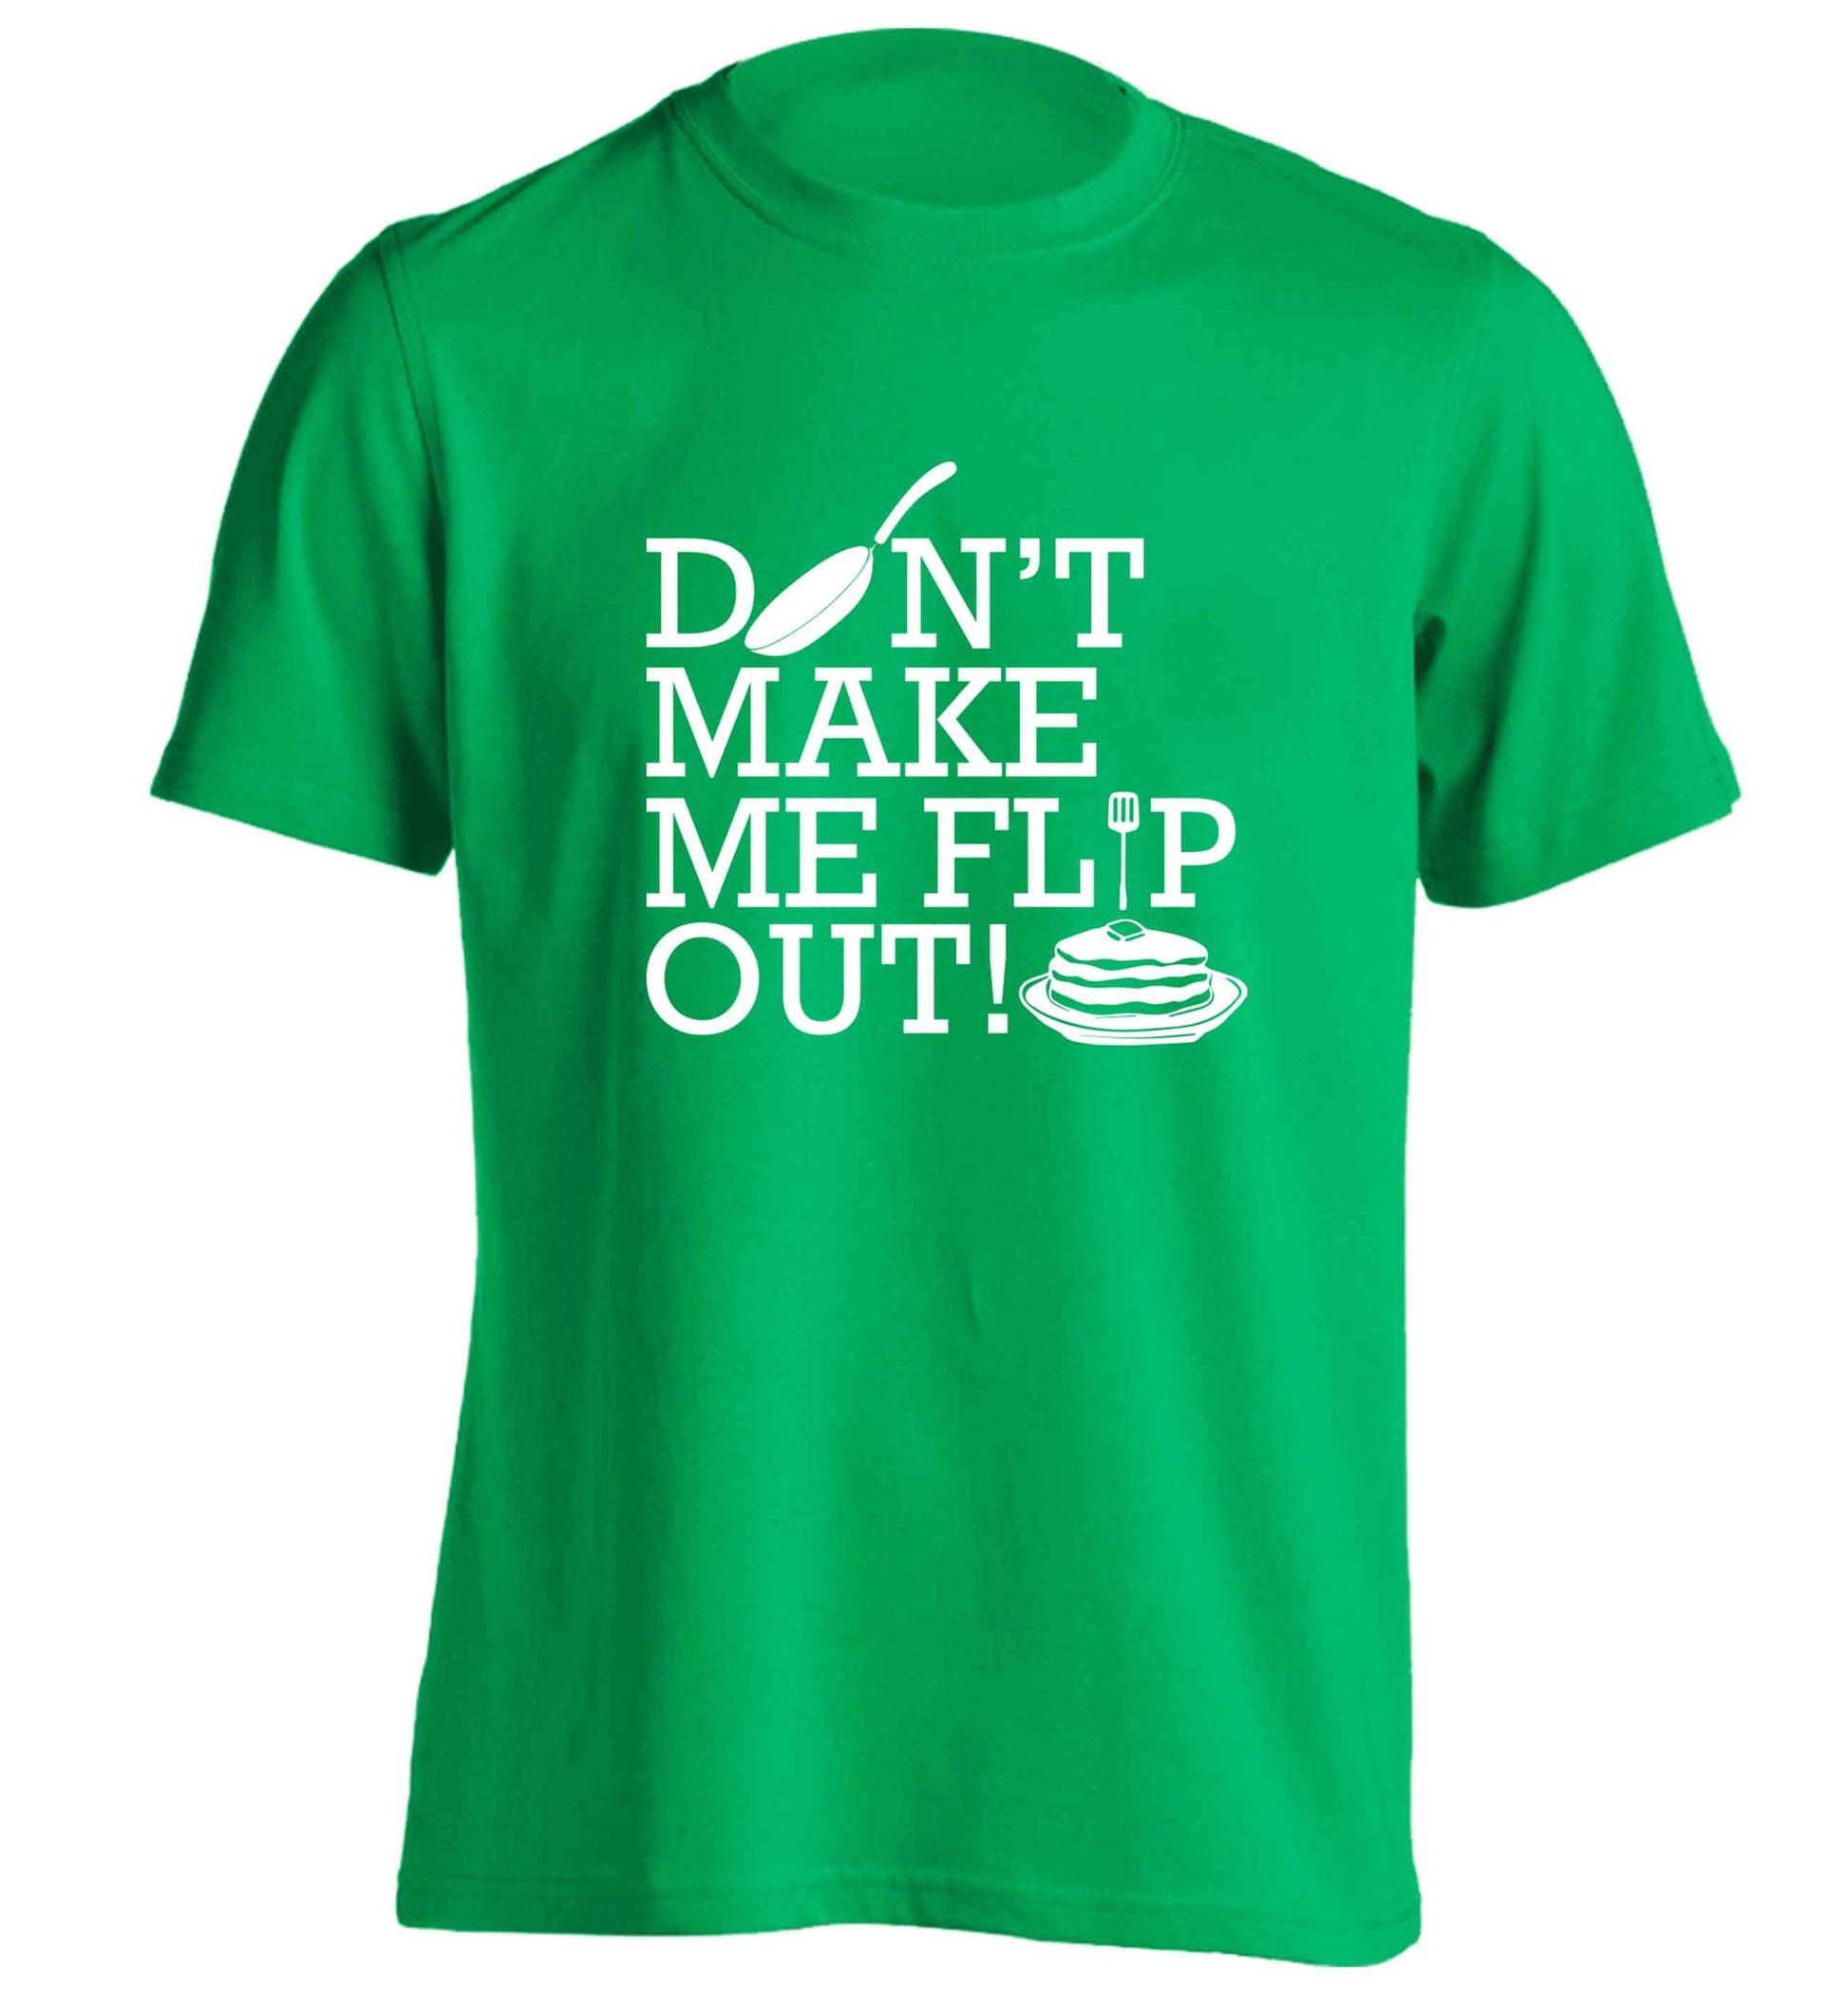 Don't make me flip out adults unisex green Tshirt 2XL